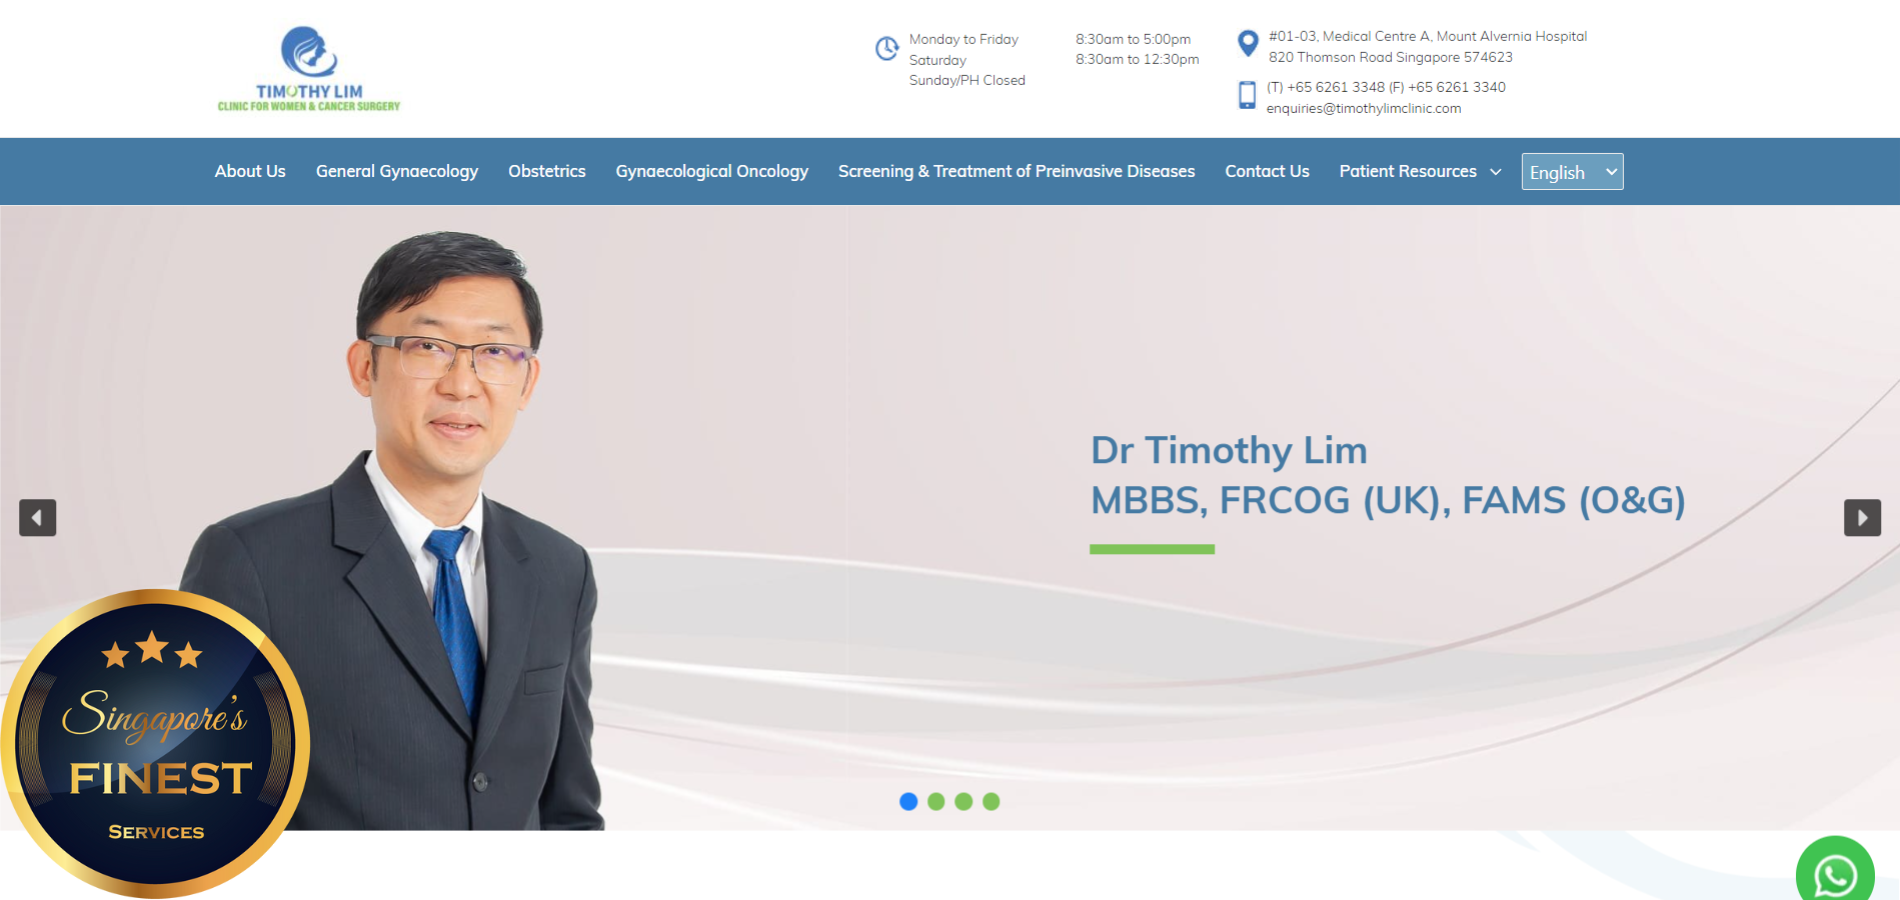 The Finest Clinics With The Best Oncologists in Singapore